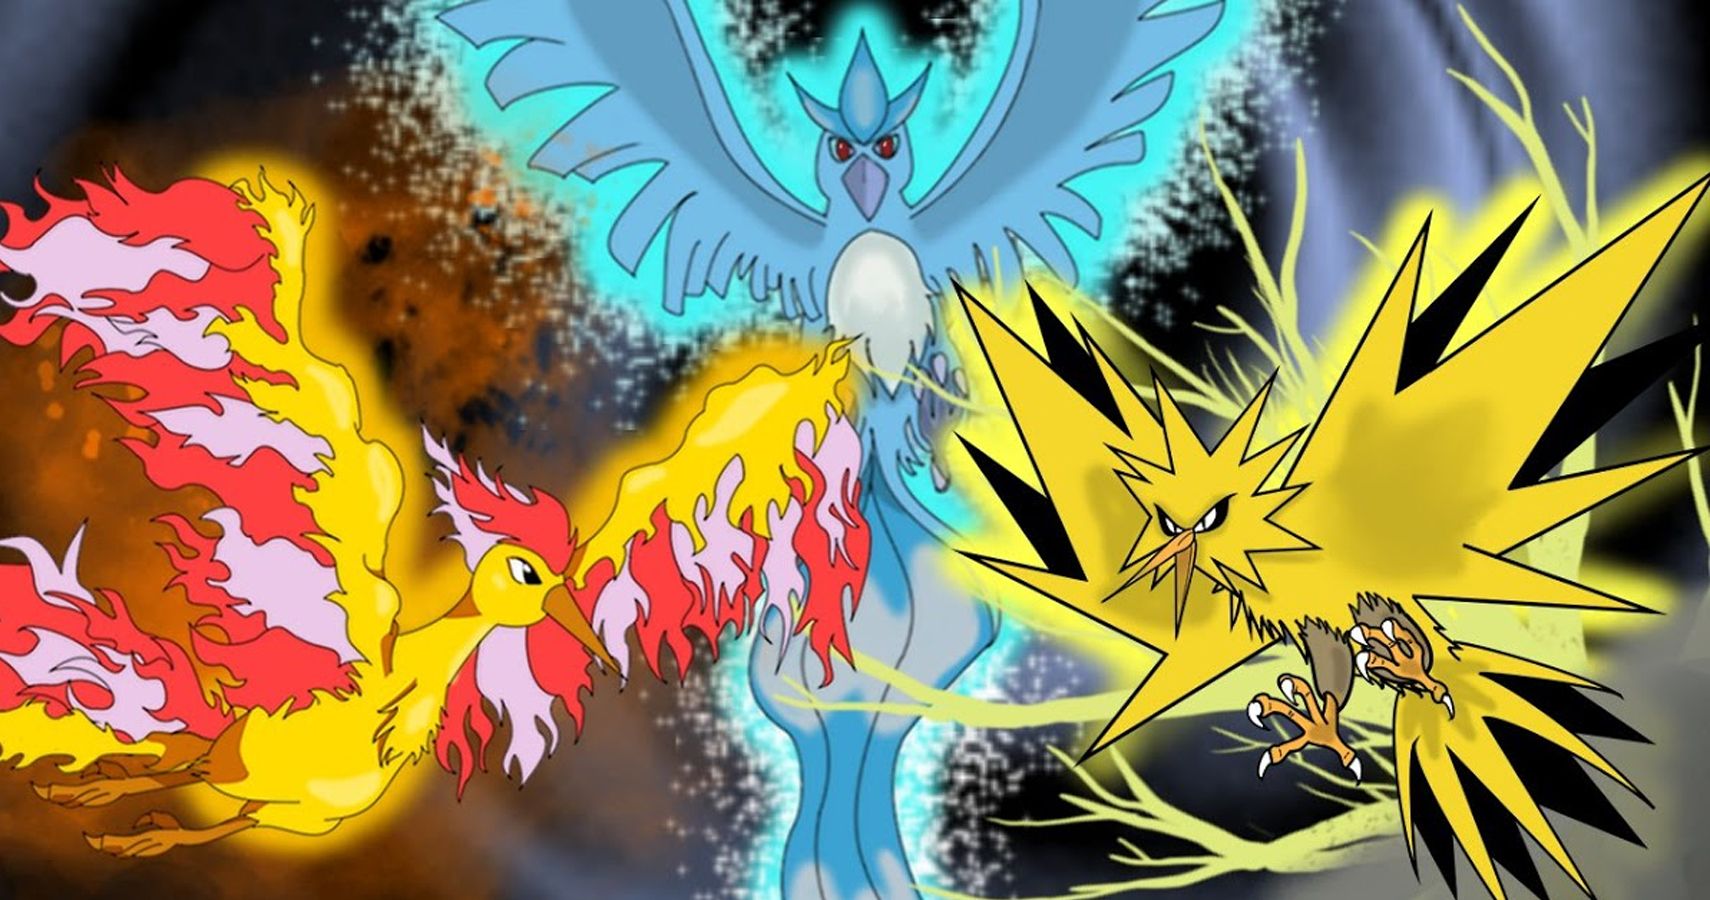 15 Surprising Facts About The Three Legendary Birds: Articuno, Zapdos, and  Moltres